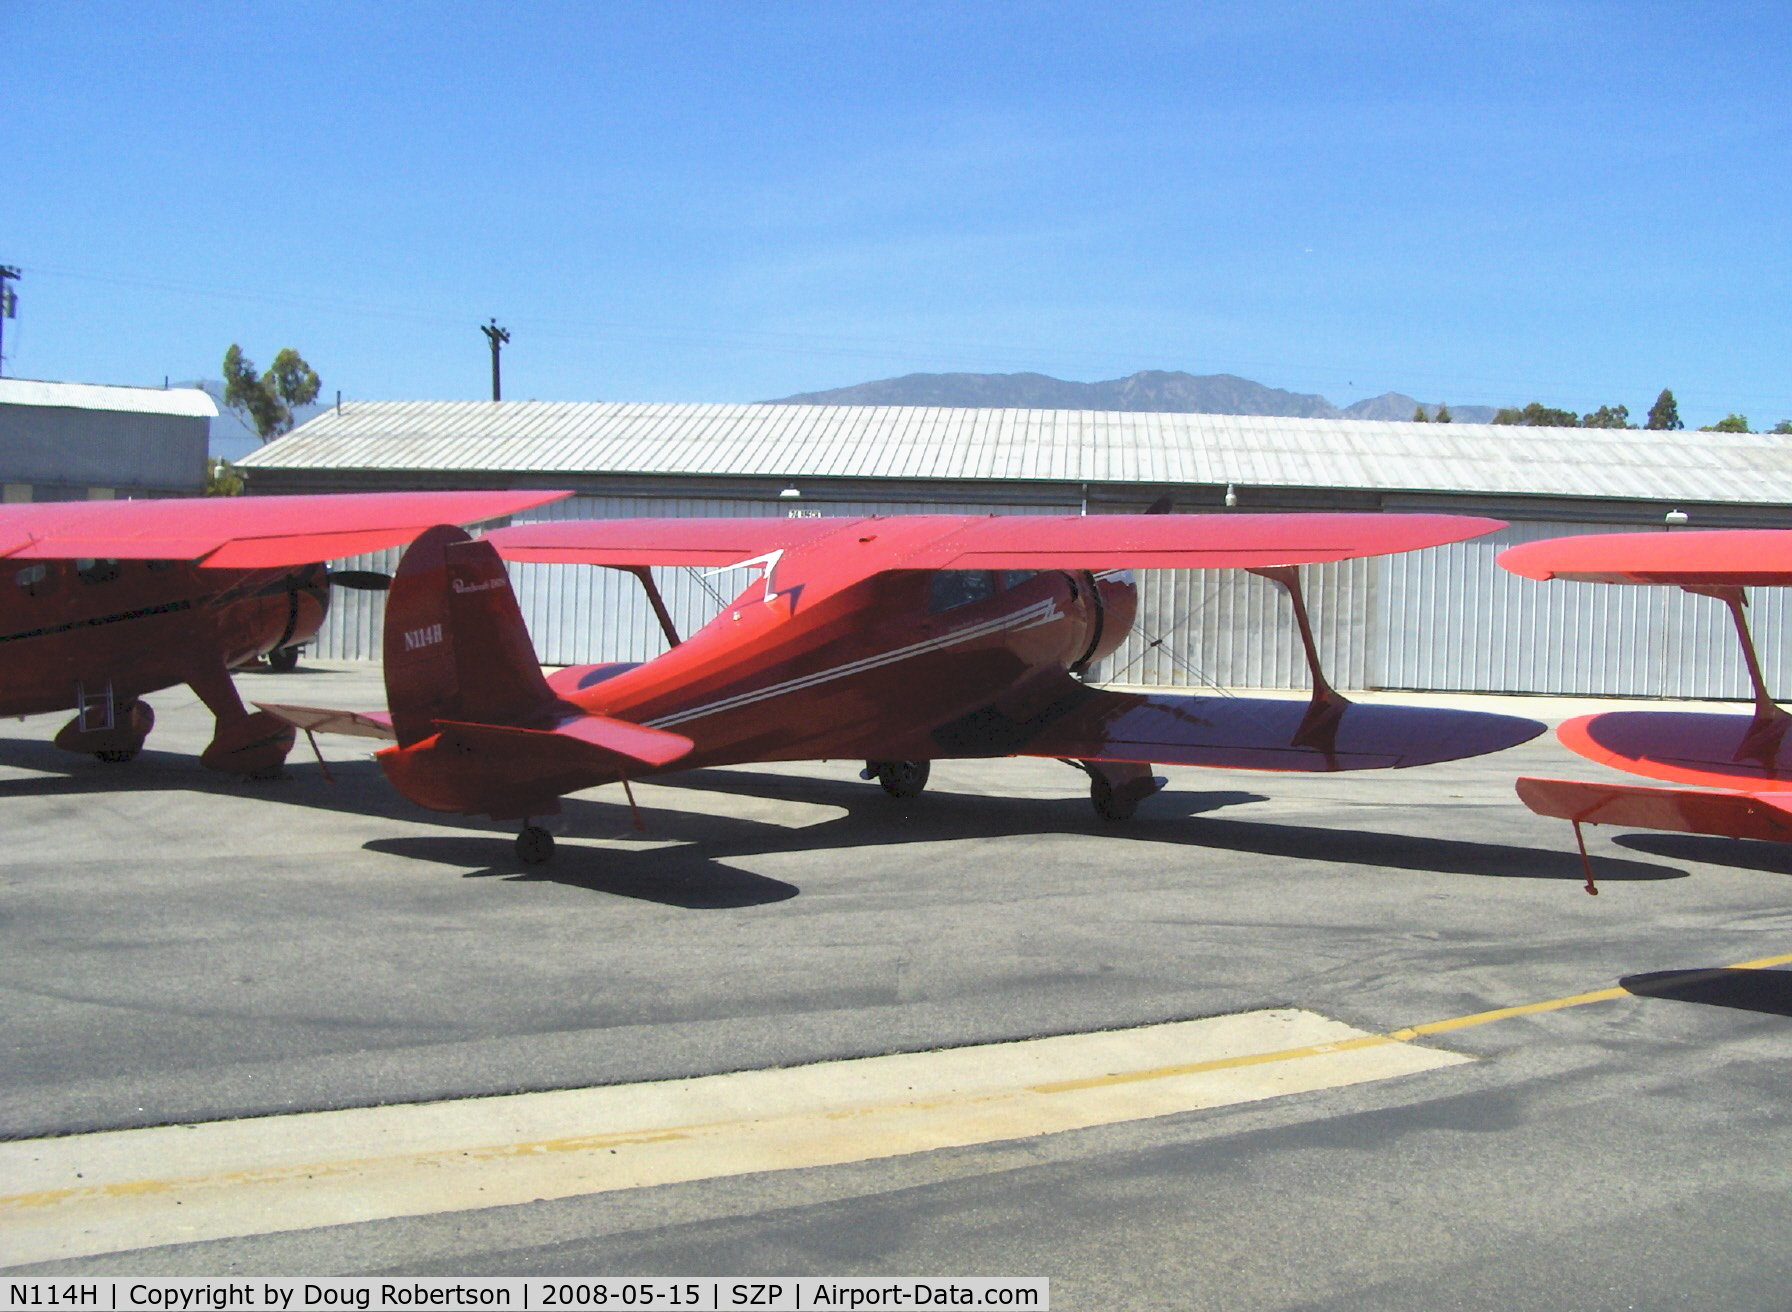 N114H, 1939 Beech D17S Staggerwing C/N 327, 1939 Beech D17S STAGGERWING, P&W R-985 Wasp Jr. 450 Hp